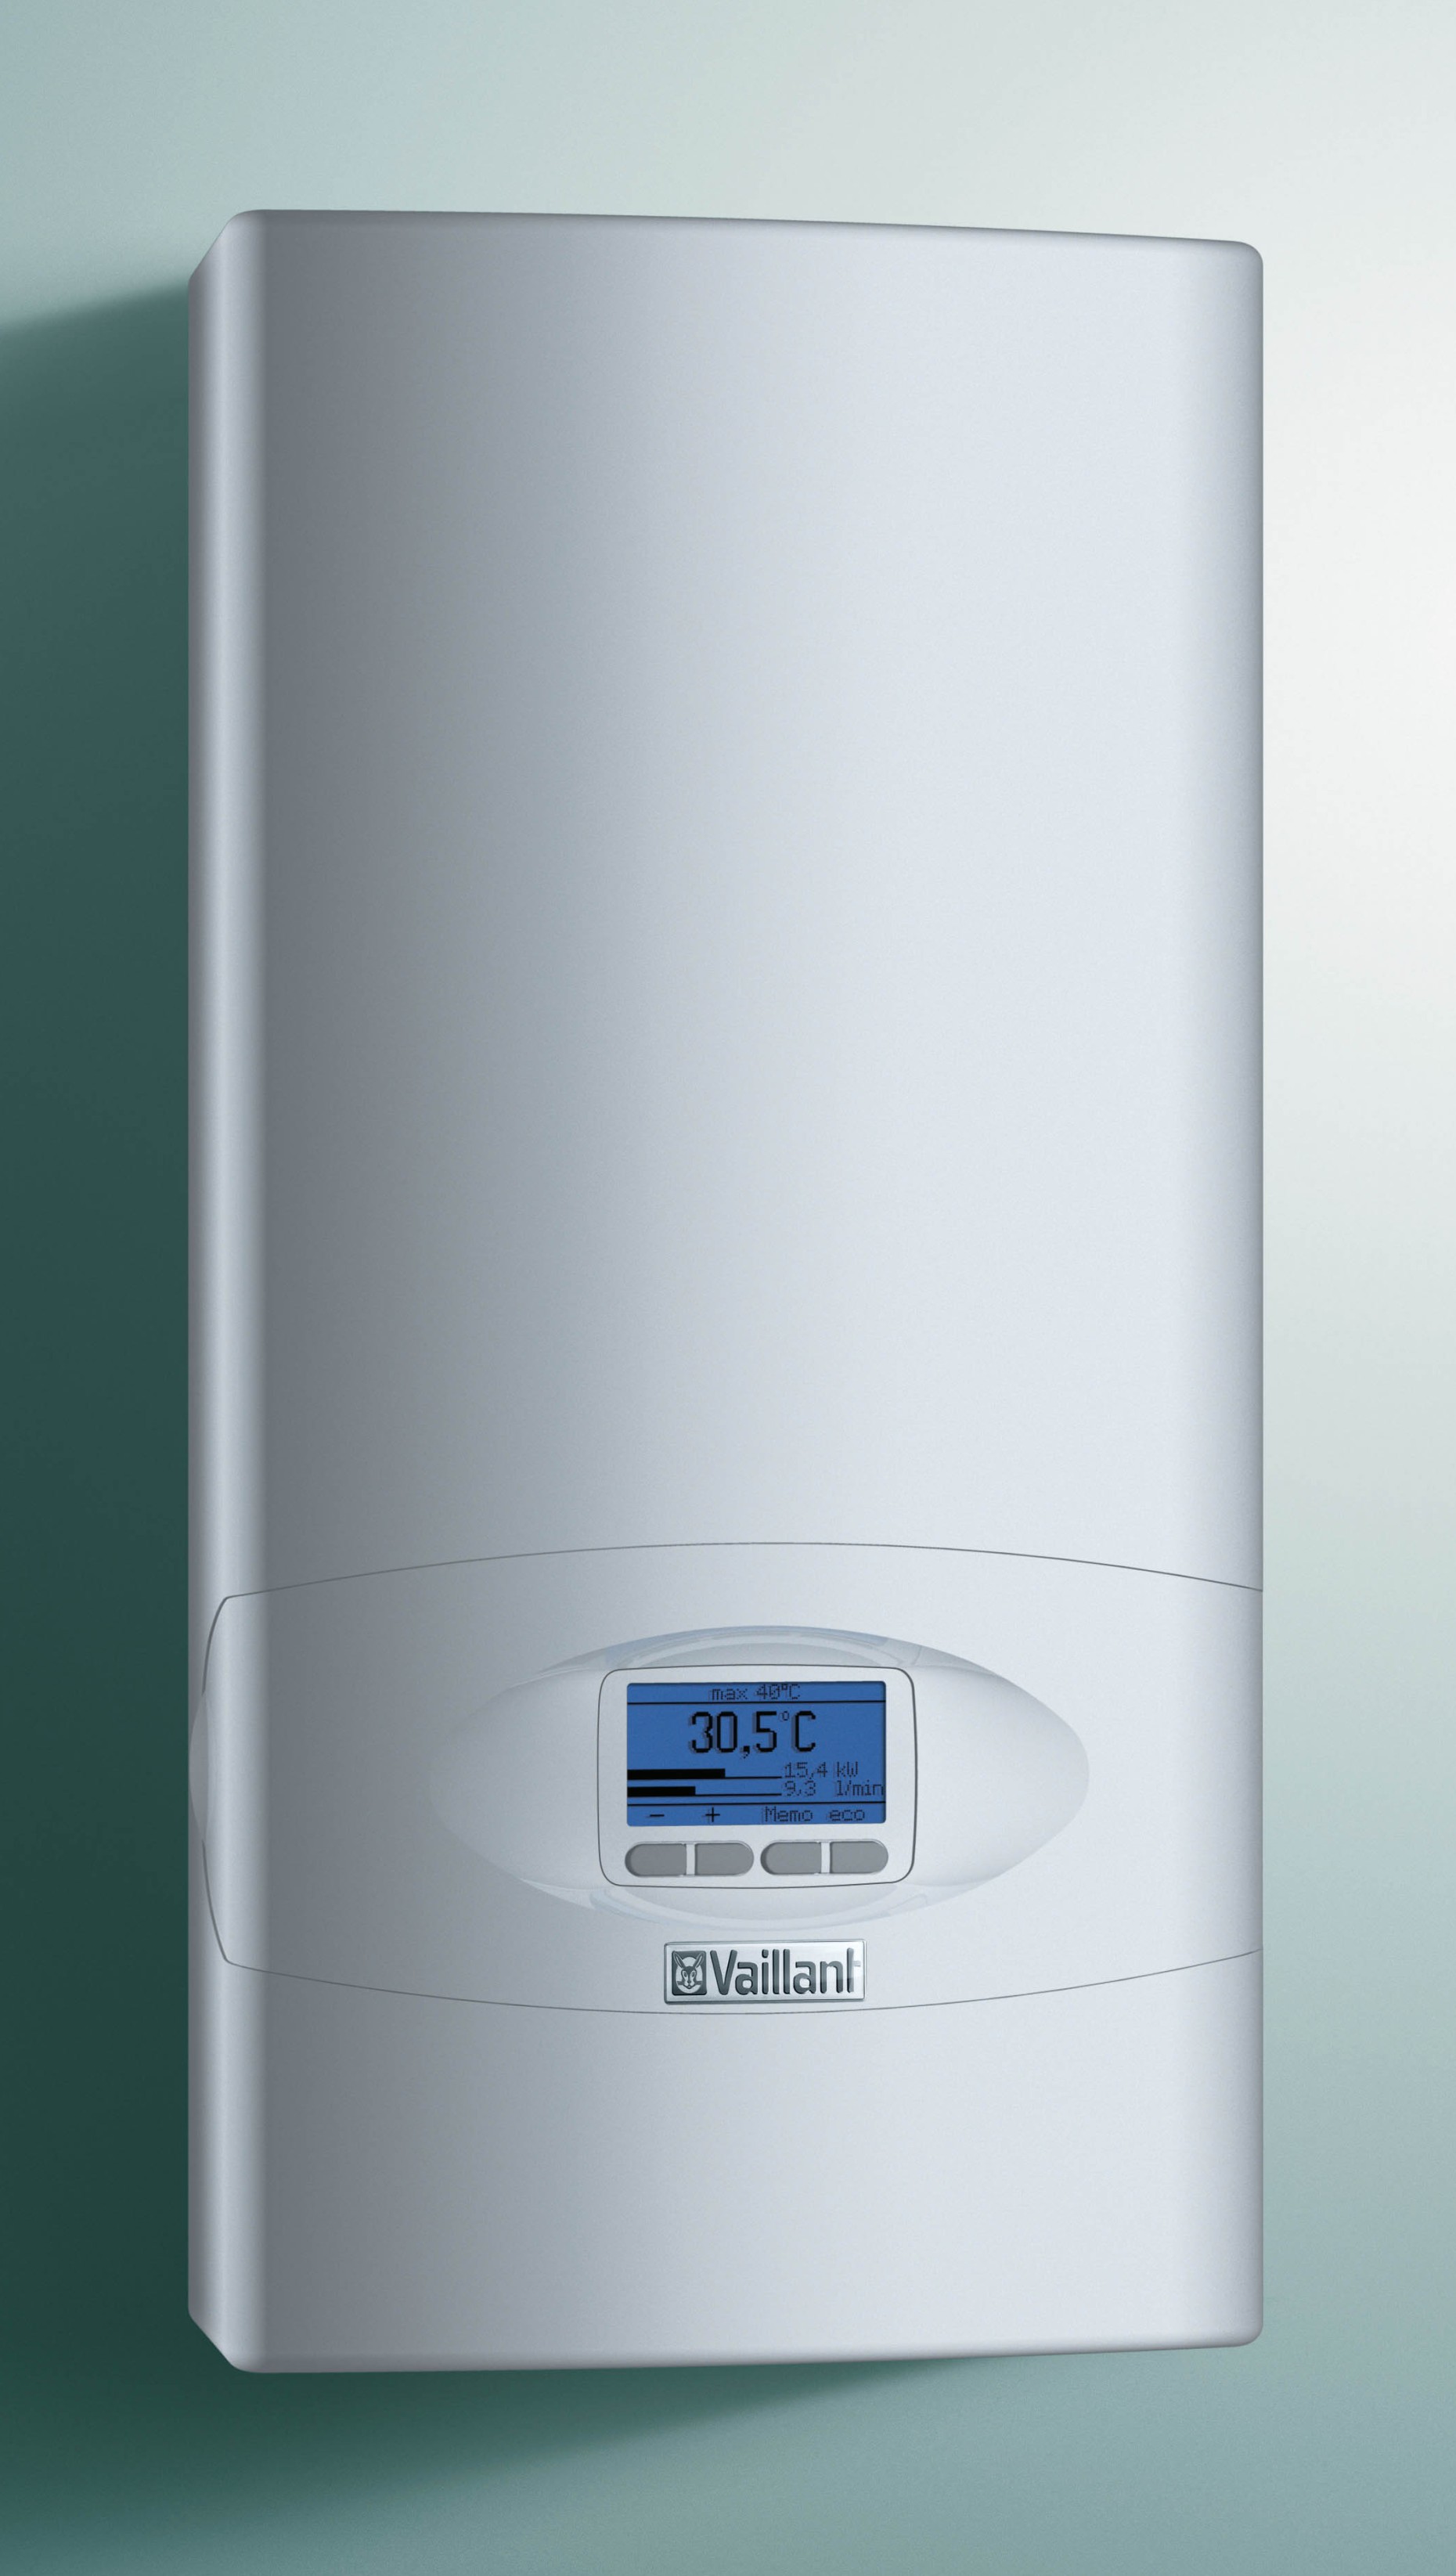 Electric Instantaneous Water Heaters Ved Innovative Technique For Individual Comfort Vaillant